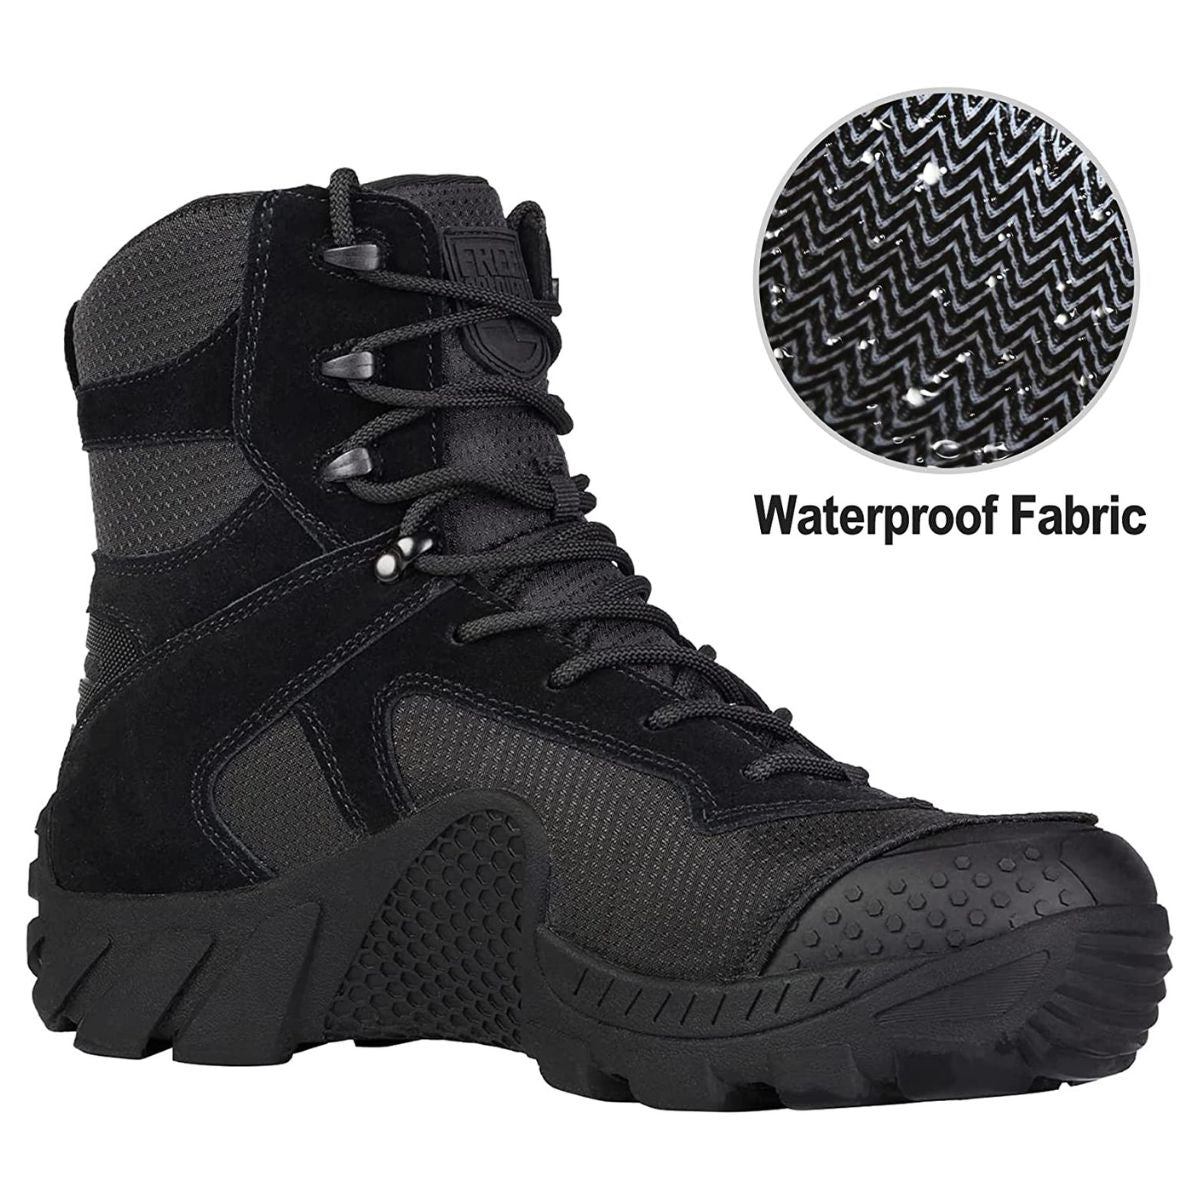 5.12 Inch Suede Leather Waterproof Hunting Boots